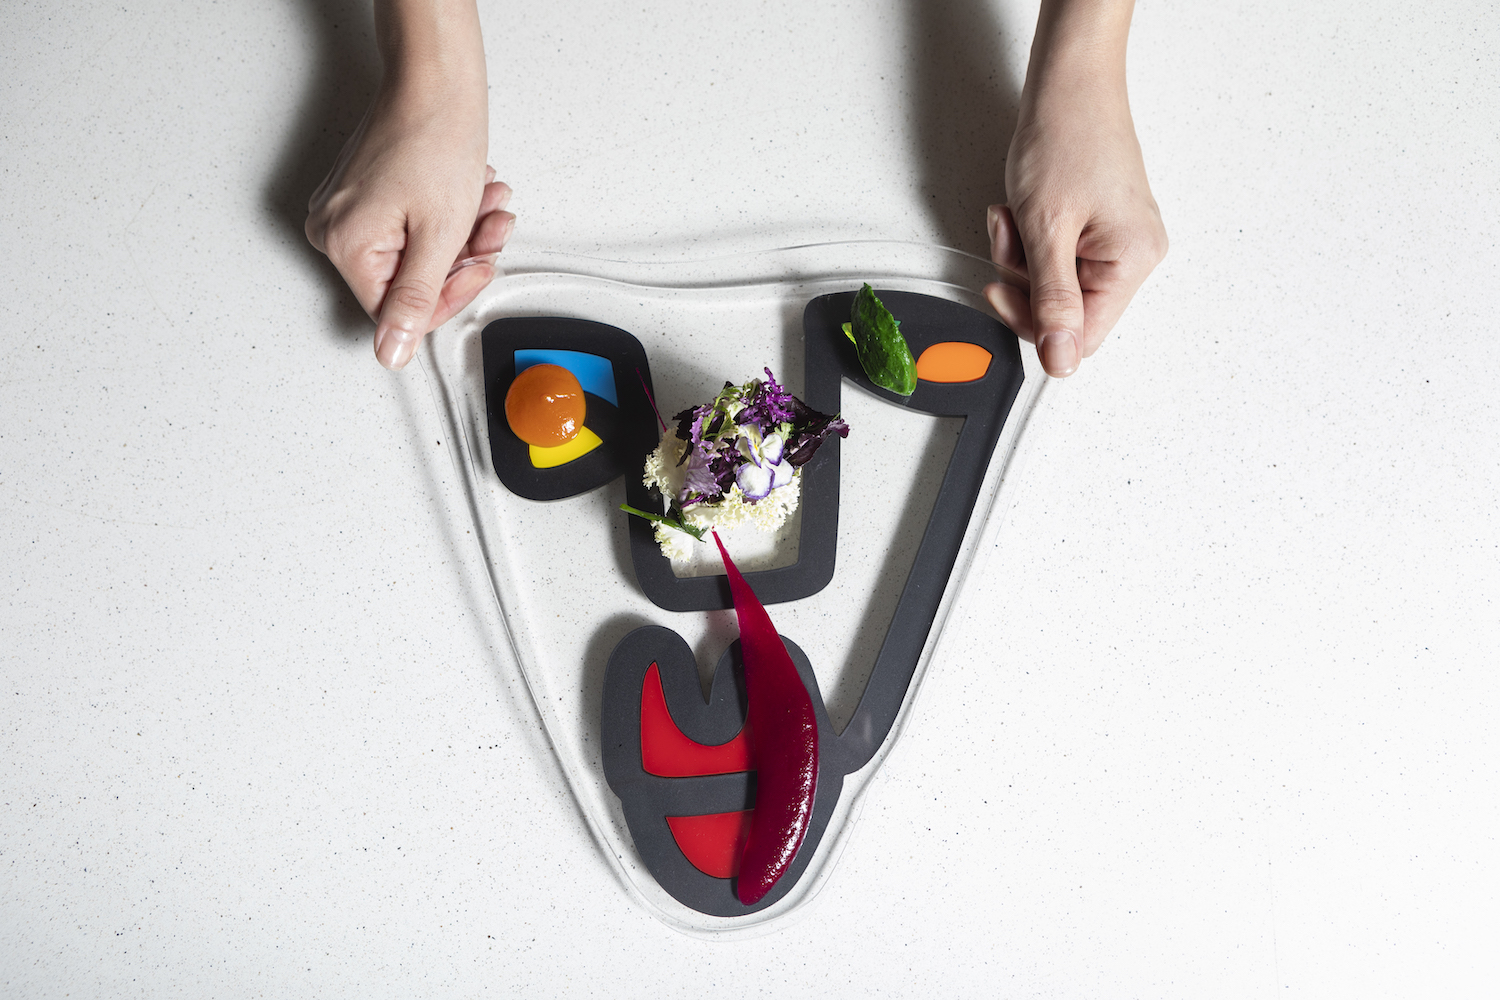 Food being handed out on a platter with flowers in the middle